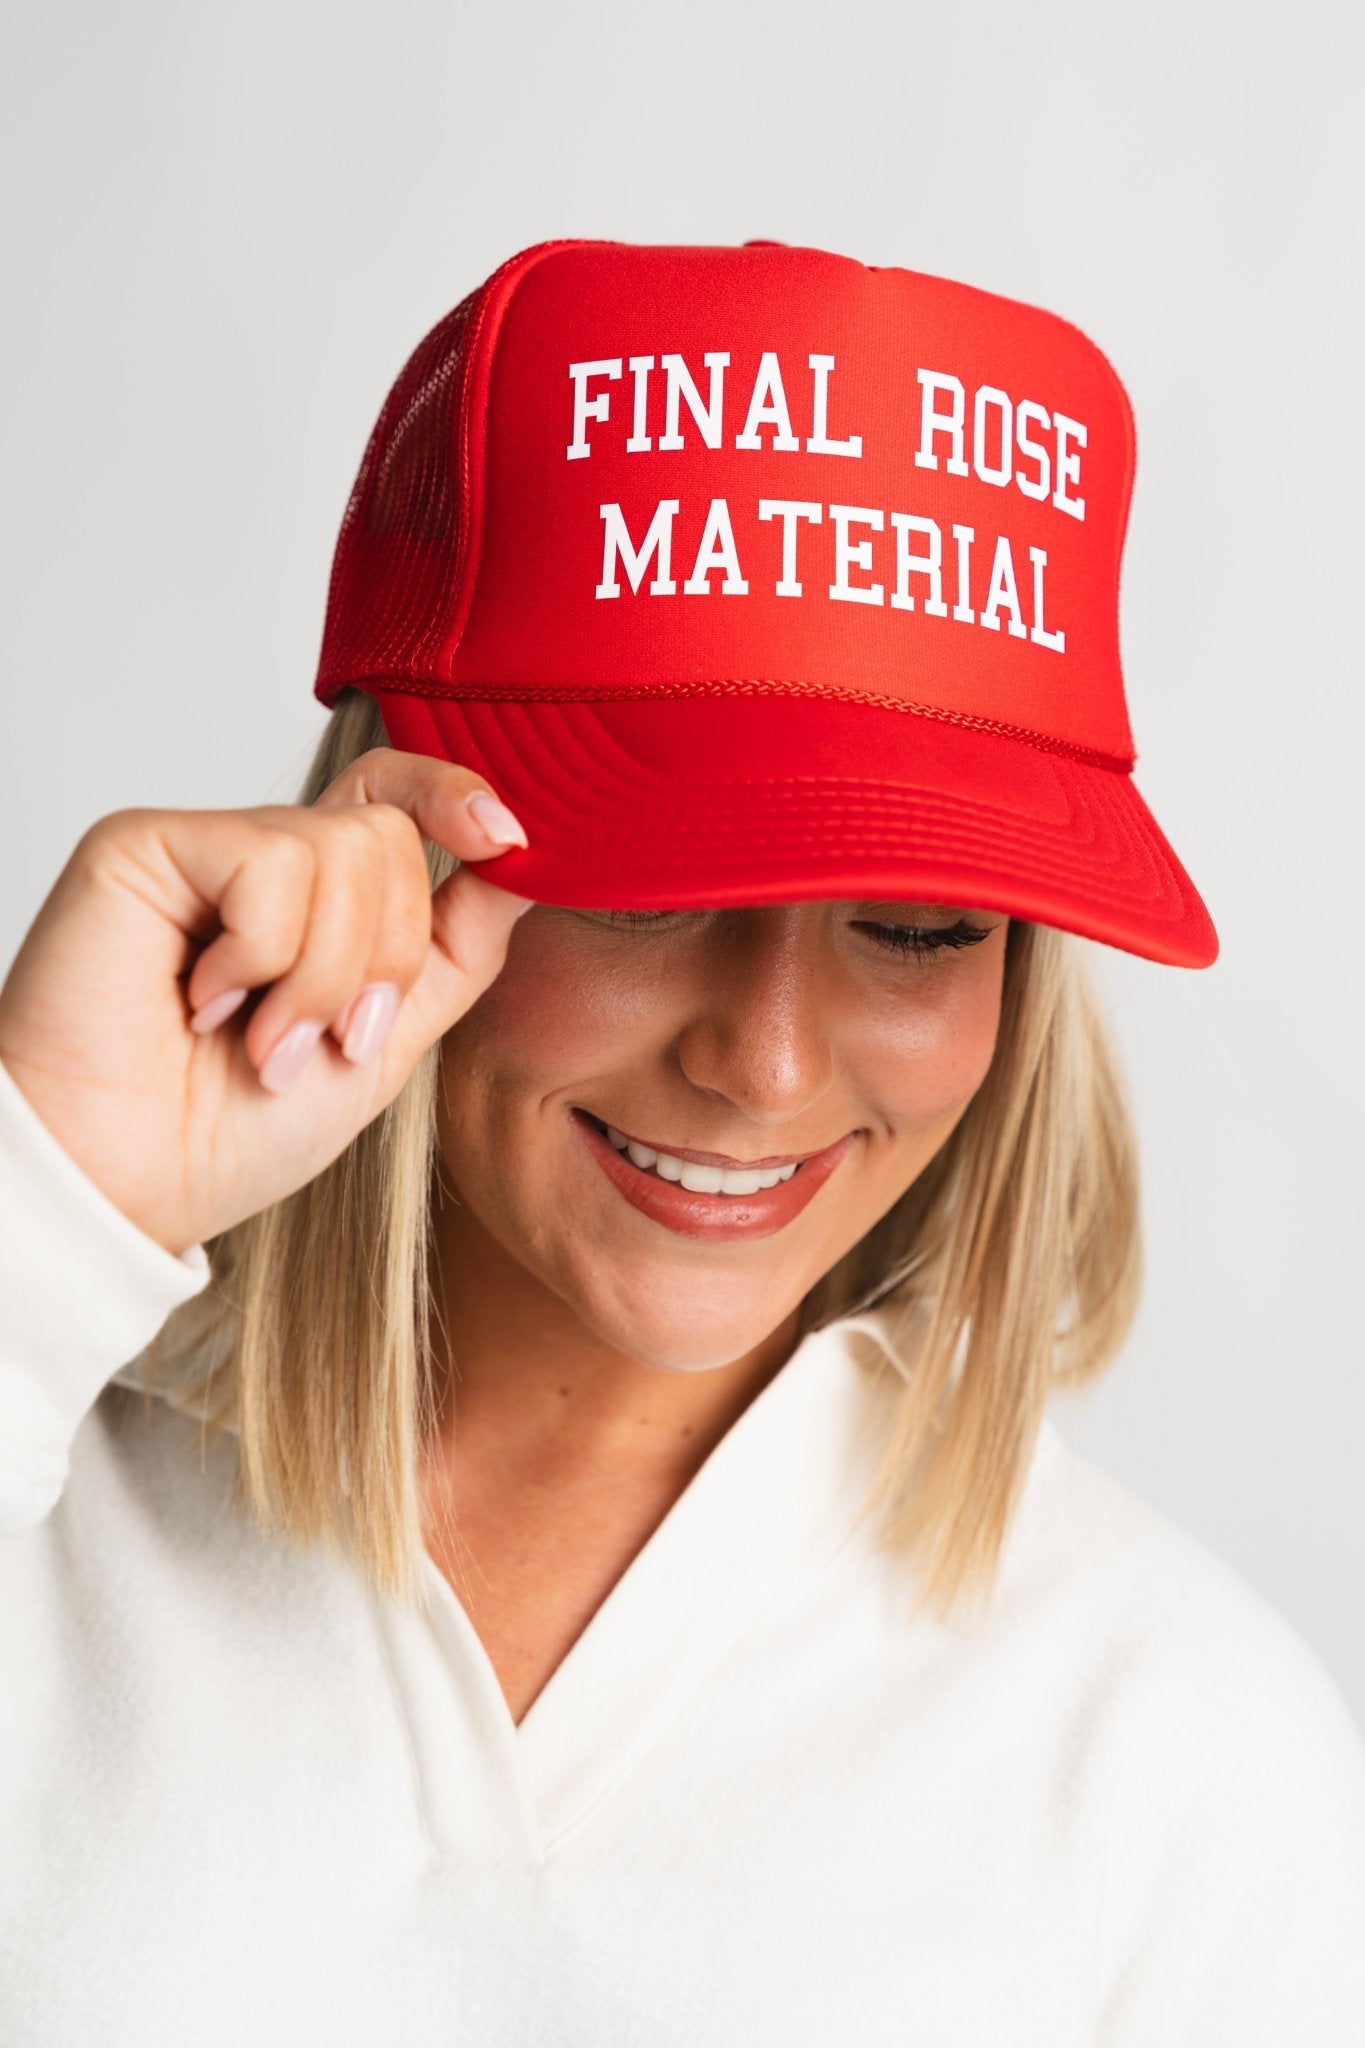 Final rose material trucker hat red - Trendy Valentine's T-Shirts at Lush Fashion Lounge Boutique in Oklahoma City